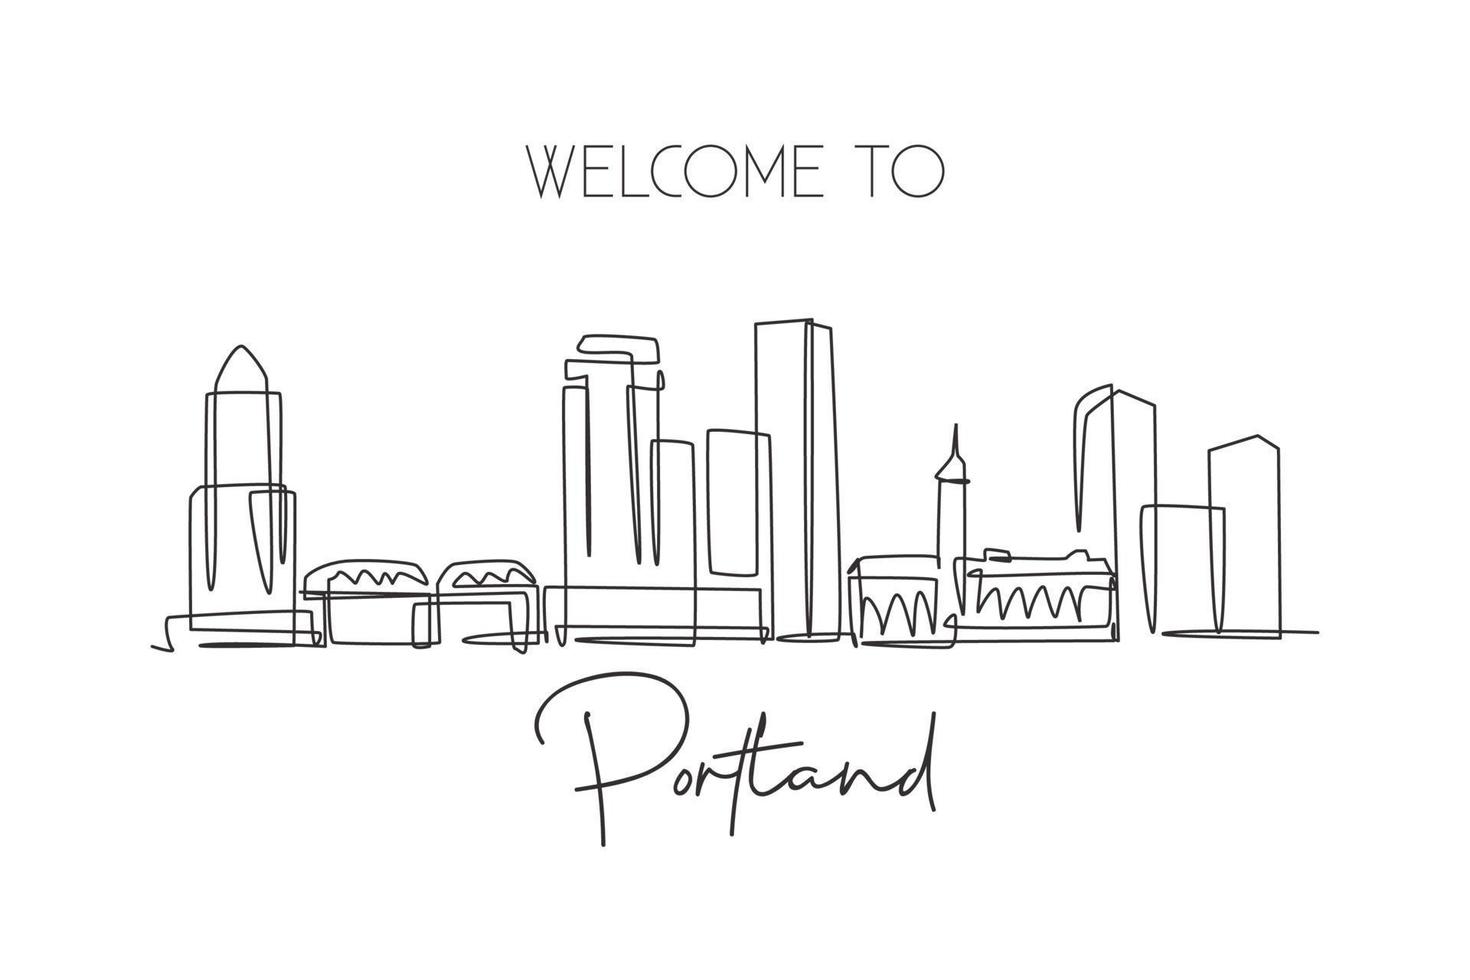 Single continuous line drawing of Portland city skyline, USA. Famous city scraper and landscape. World travel concept home wall decor art poster print. Modern one line draw design vector illustration